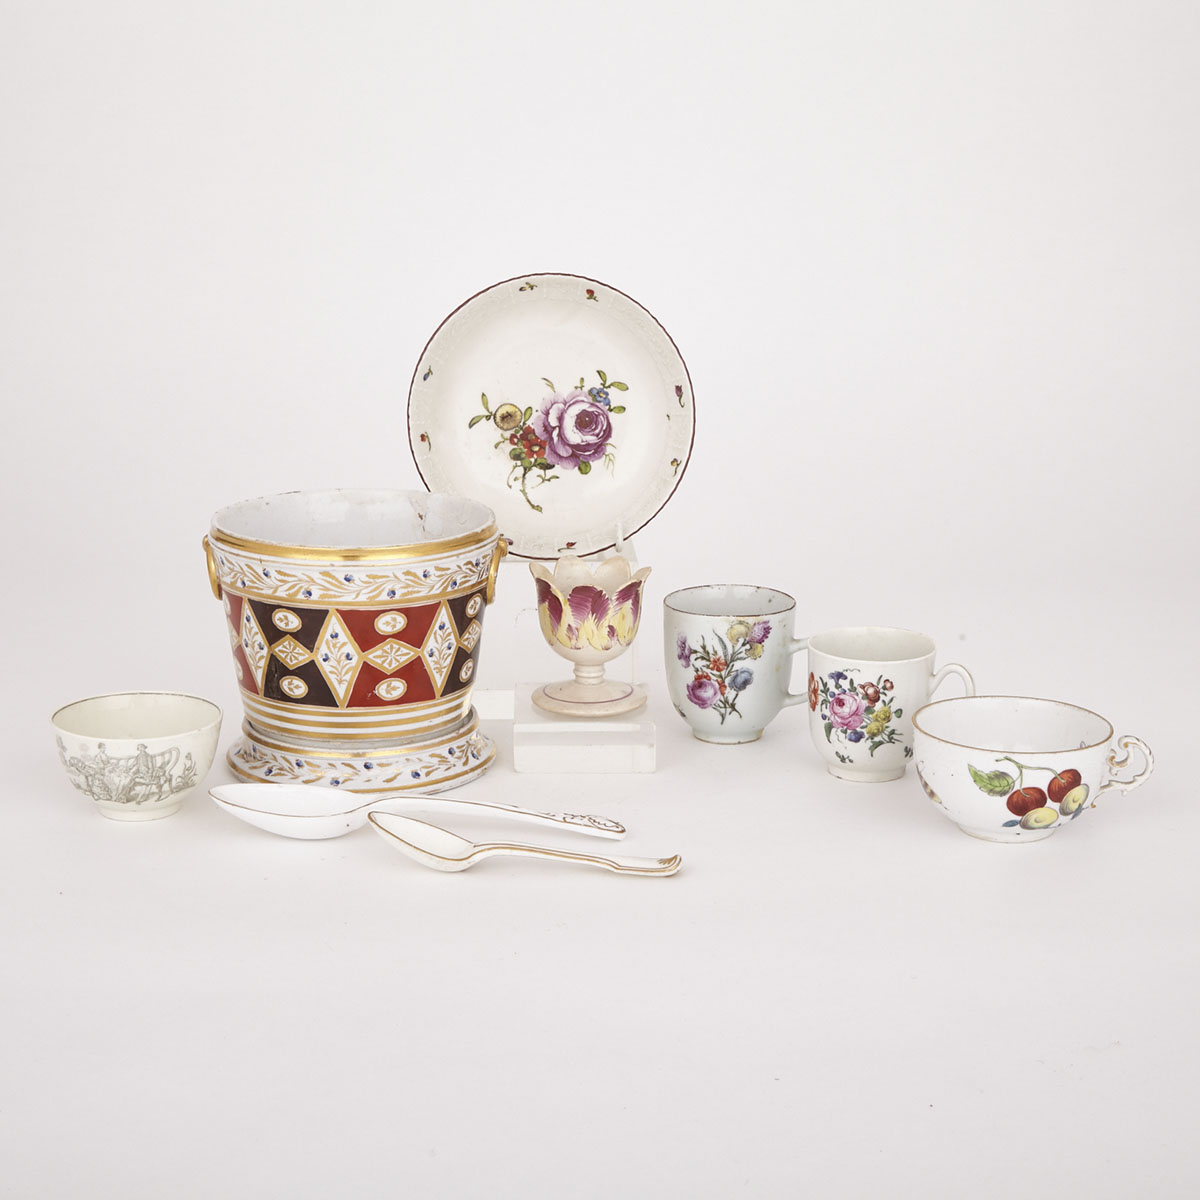 Group of English Porcelain and Pottery Articles, 18th/19th century